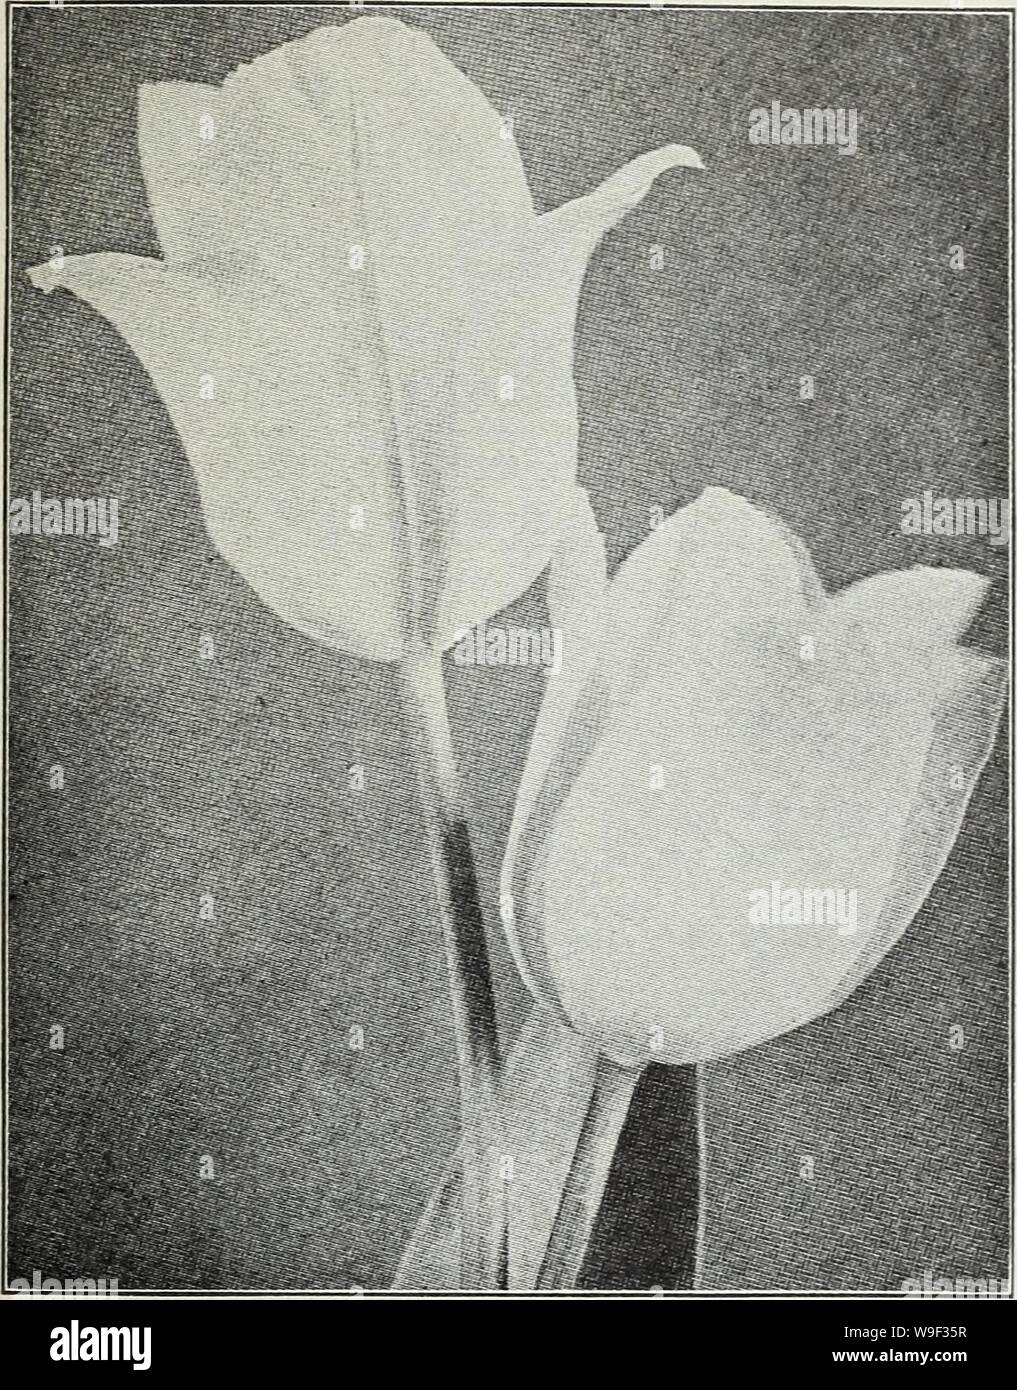 Archive image from page 12 of Currie's autumn 1929 54th year. Currie's autumn 1929 54th year bulbs and plants  curriesautumn19219curr Year: 1929 ( Currie's Seed Store, Milwaukee, Wisconsin    EARLY DOUBLE FLOWERING TULIPS Azalea—(E. 8) Beautiful deep rose flushed salmon. Doz., 1.25; 100, 8.50; 1000, 80.00. Boule de Neige—(E. 10) Large pure white. Doz., 95c; 100, 6.50; 1000, 60.00. Couronne d'Or (Crown of Gold) — (E. 10) Flower large and very double, rich golden j-cllow shaded orange. Doz., 1.20; 100, .00; 1000, 75.00. Electra—(E. 8) Carmine shaded light violet; very large and beautiful. Doz., Stock Photo